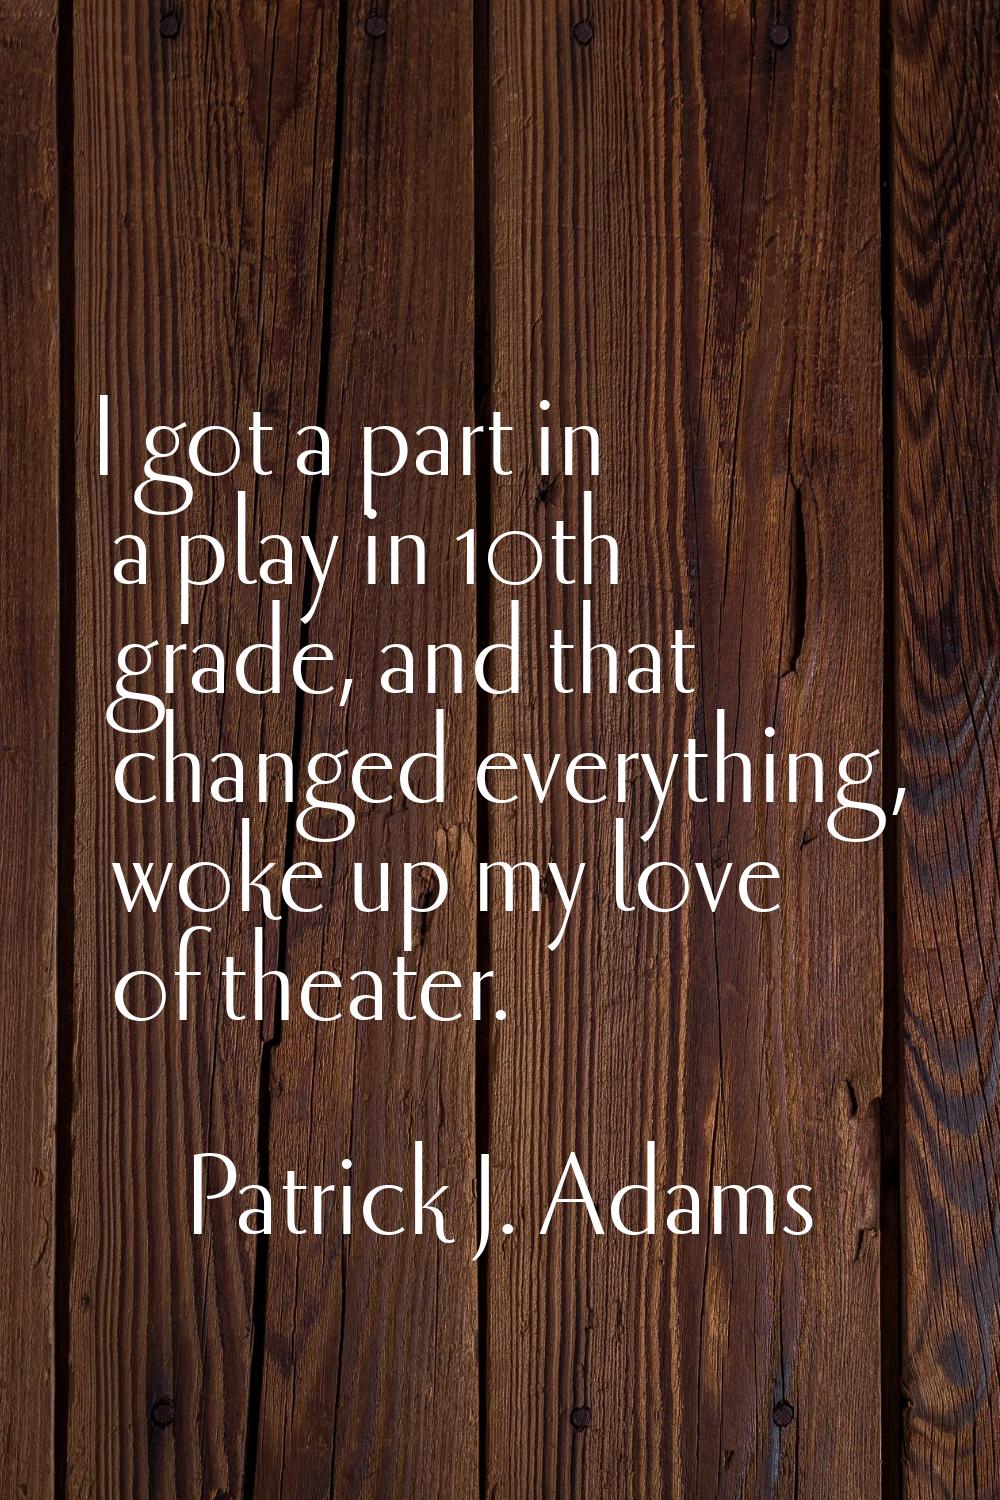 I got a part in a play in 10th grade, and that changed everything, woke up my love of theater.